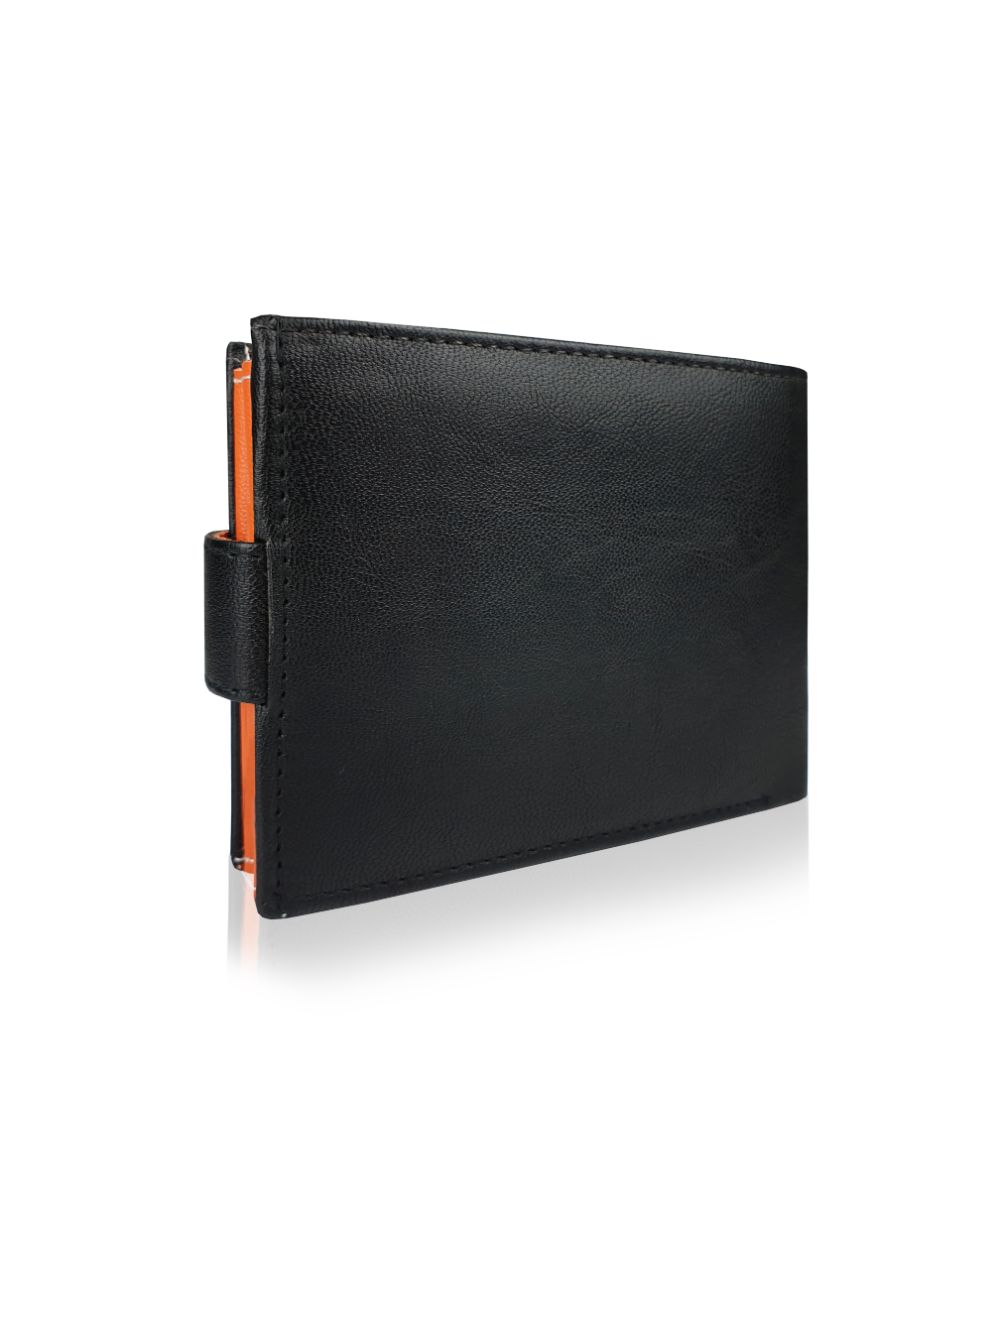 Mens Designer Leather Wallet - Pu Faux Leather - Trifold 2 Tone - R911